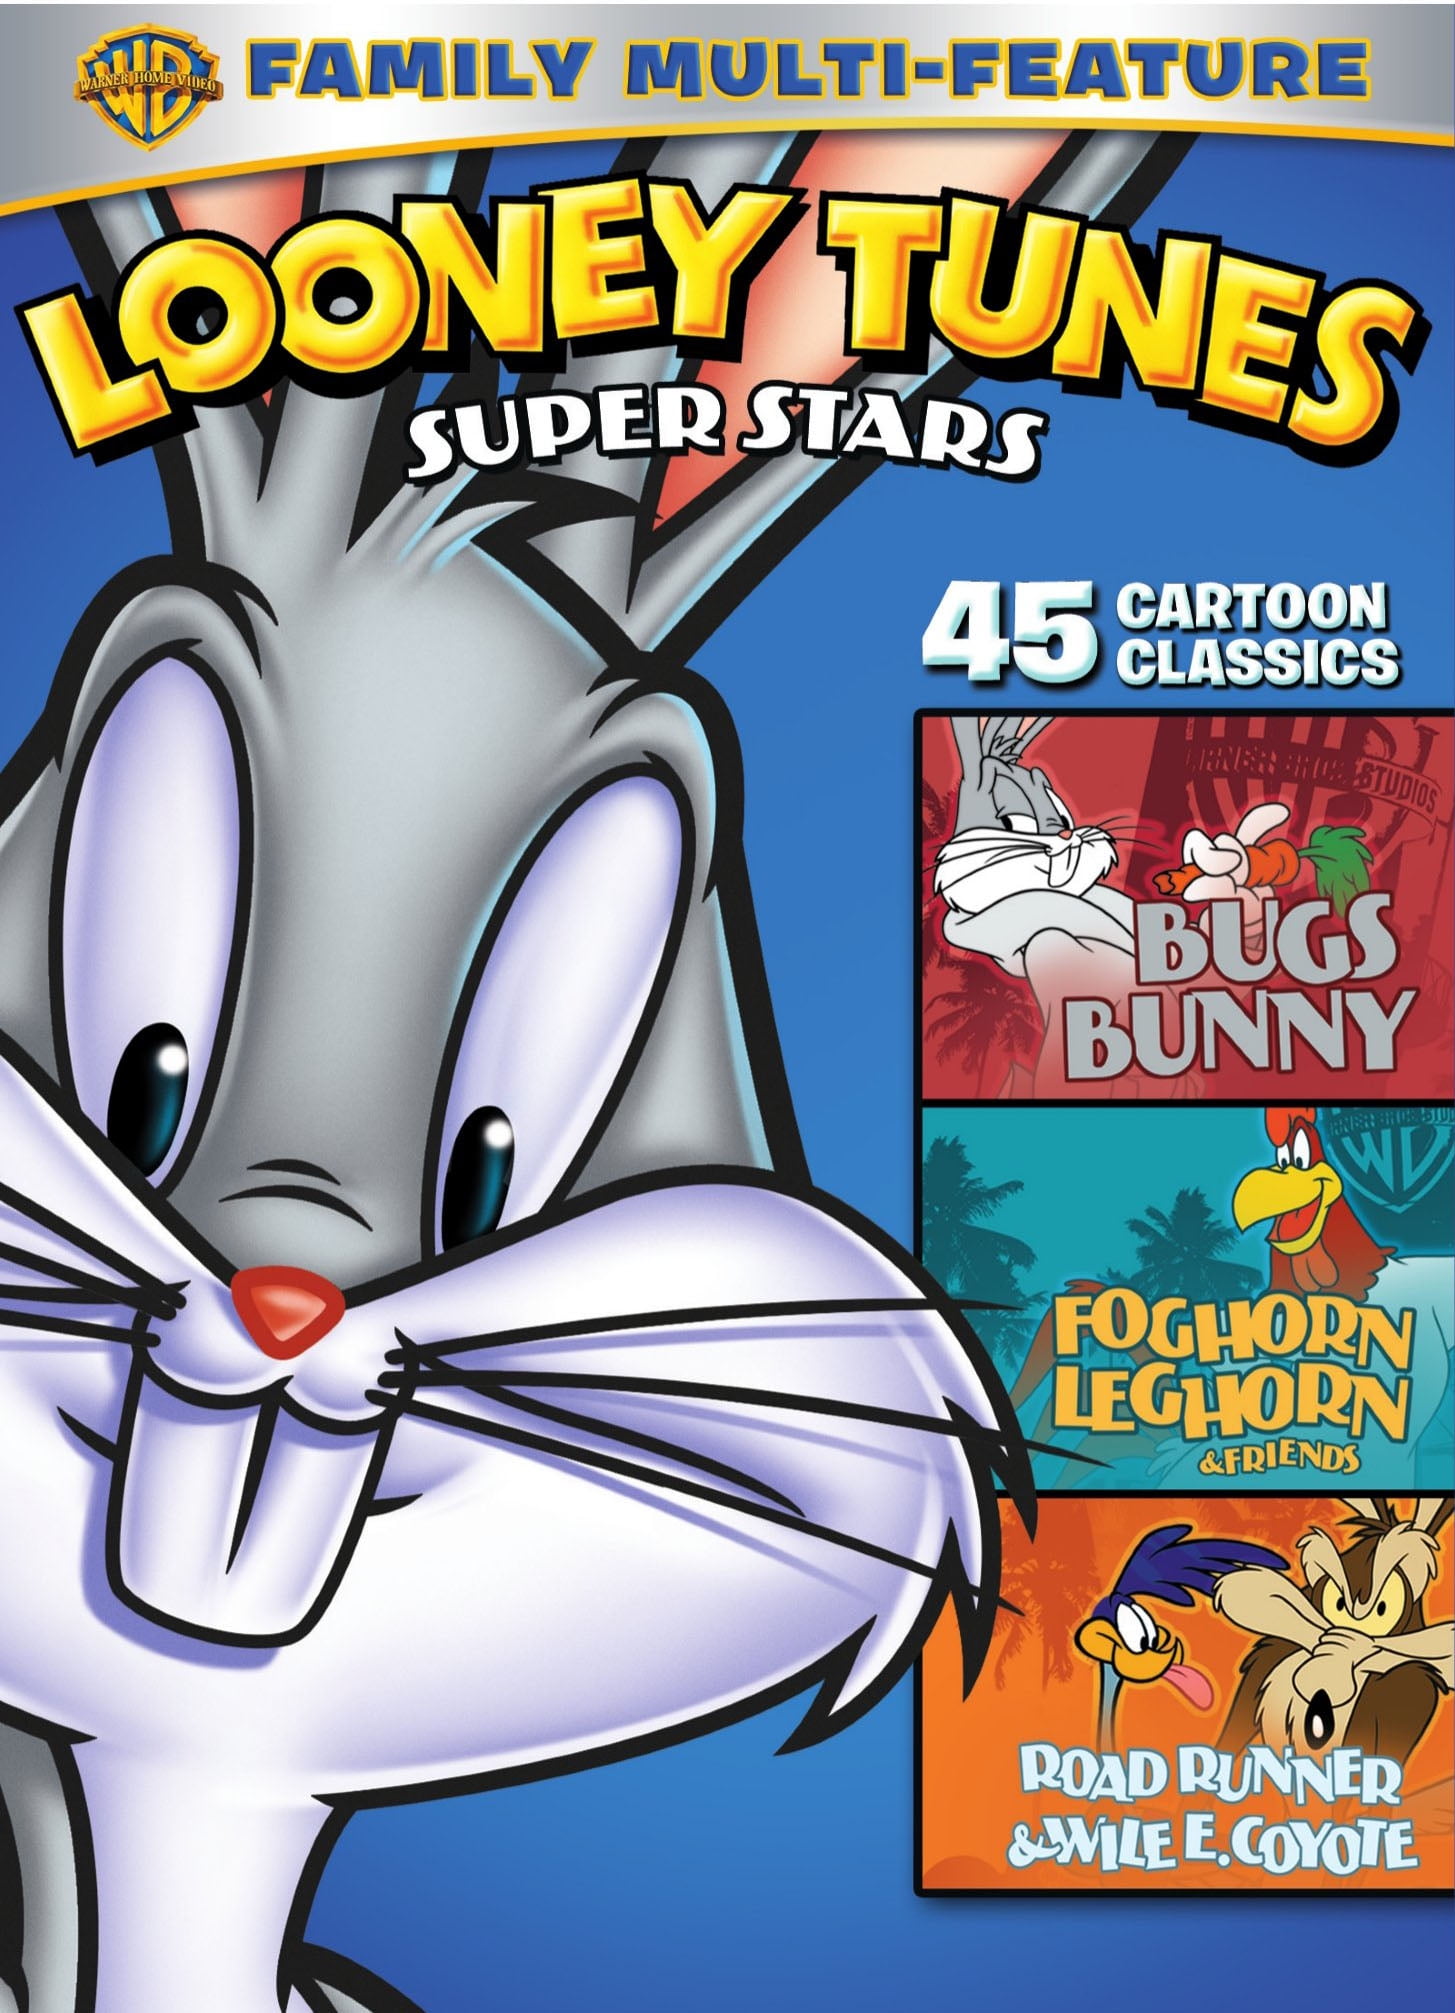 Bunny Multi-Feature Looney / Leghorn & (Bugs Tunes Runner / Road & Family Friends Coyote) E. Wyle Foghorn Stars Super (DVD)